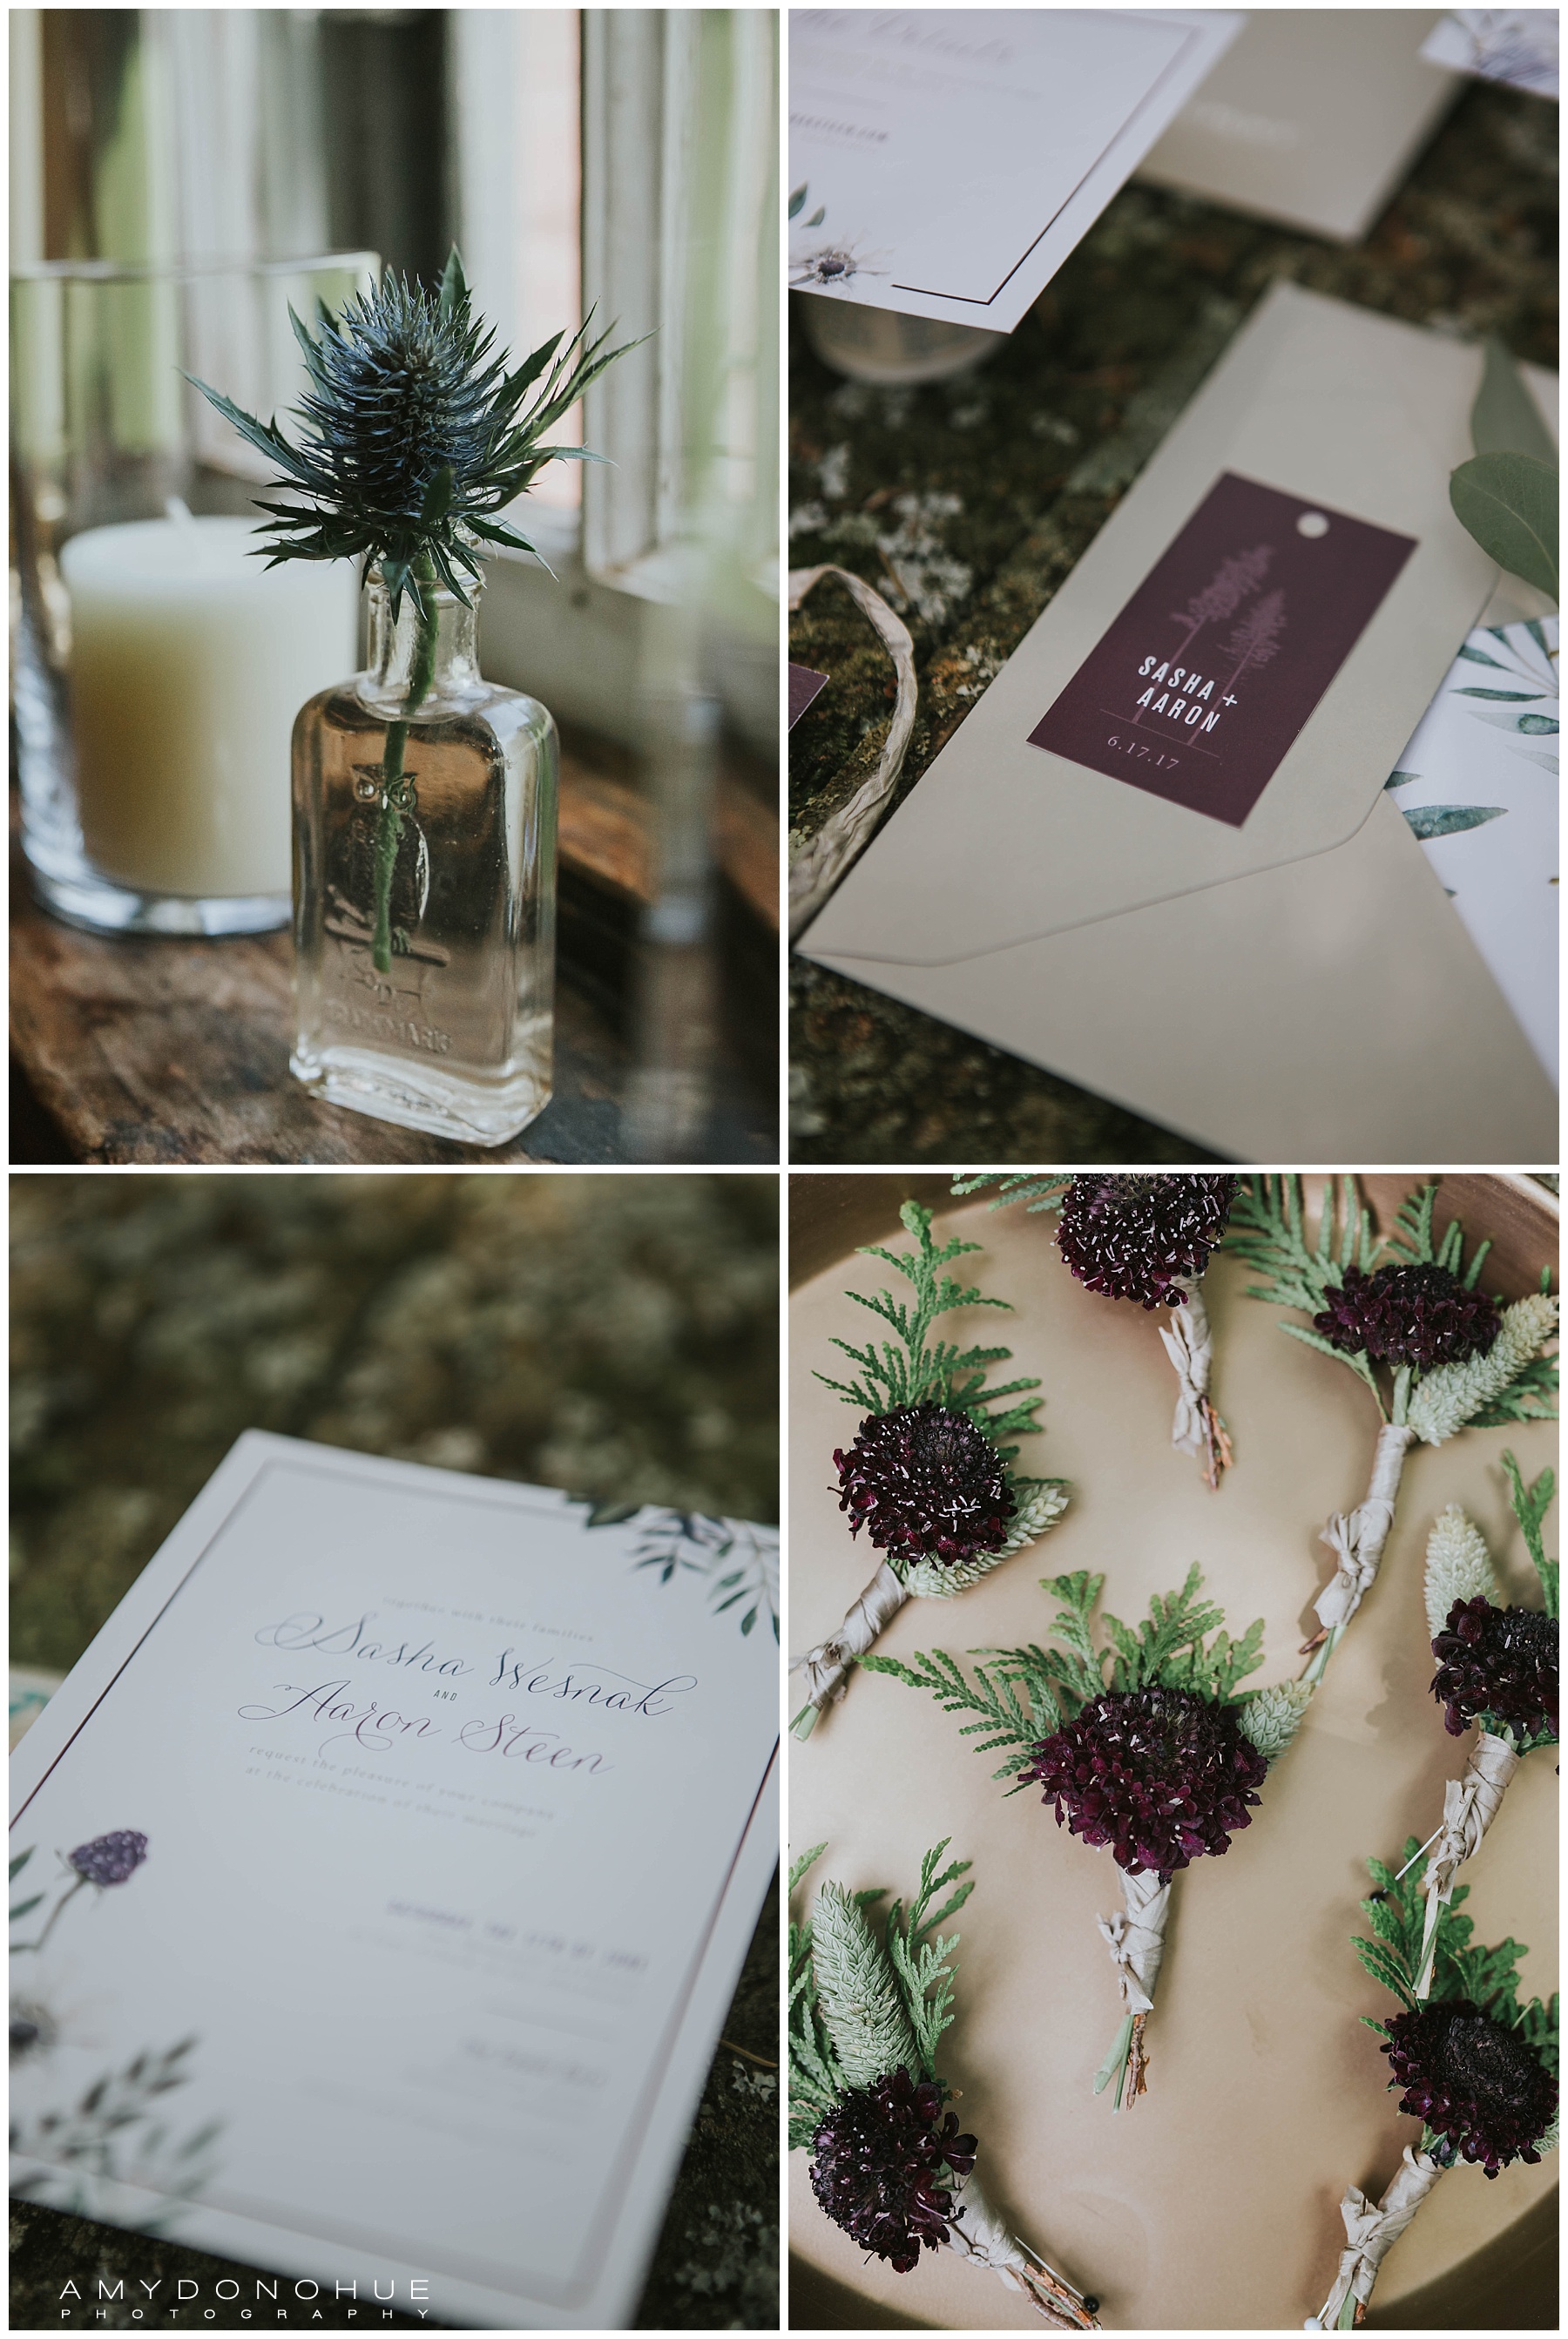 Wedding Invitations by Lulu & Roo Design Studio & boutonnieres by Nectar & Root | Photography by Amy Donohue Photography